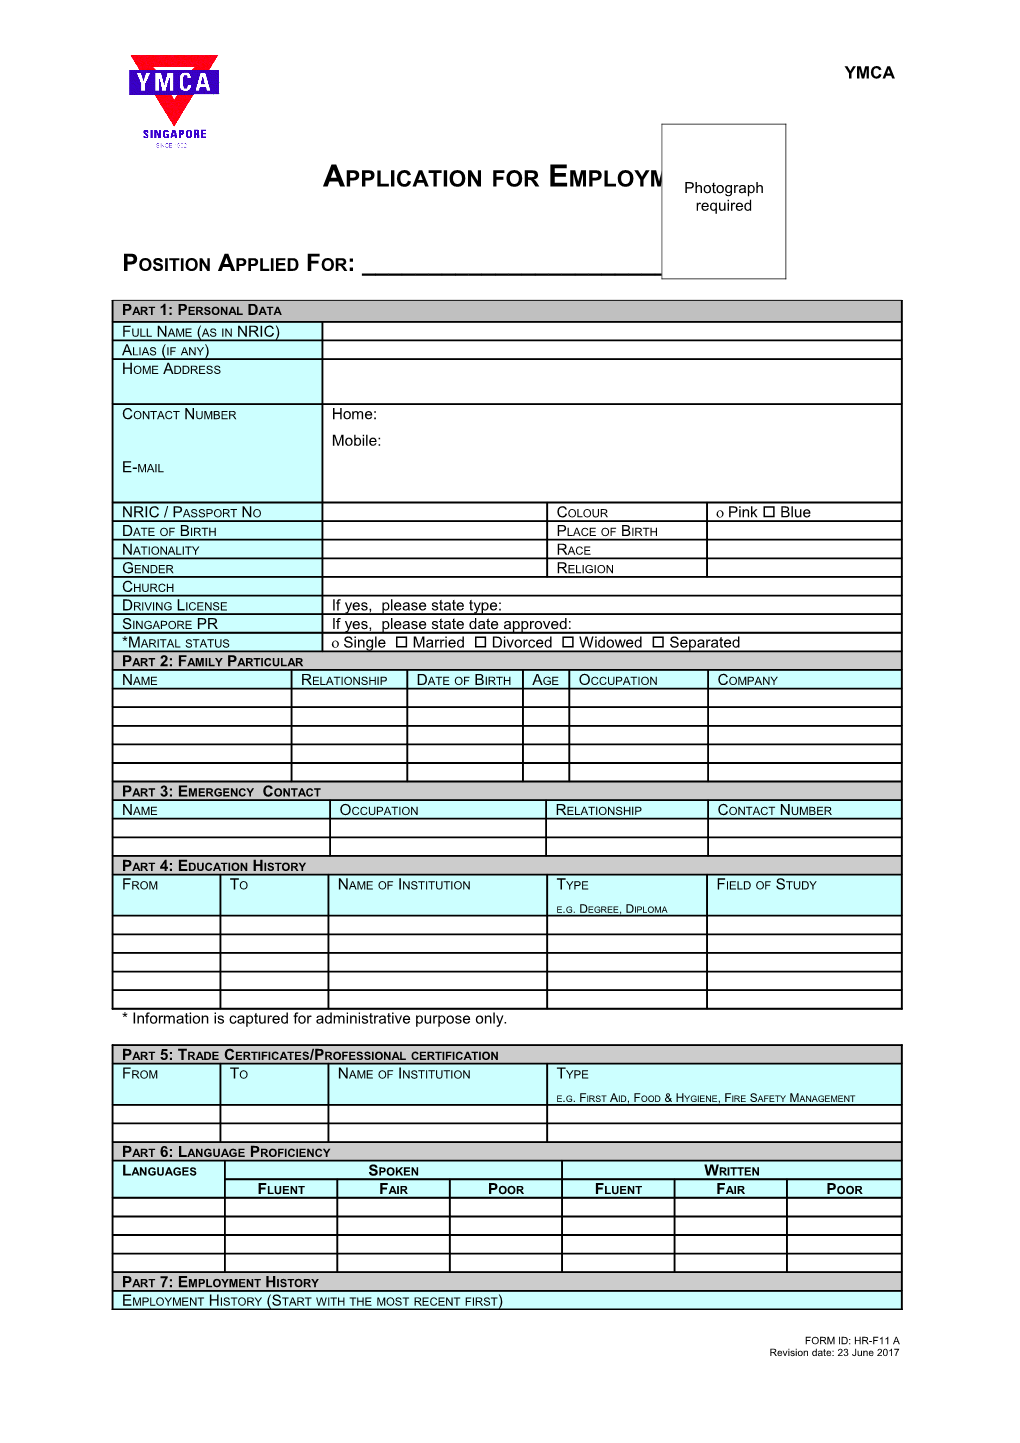 Application for Employment s94